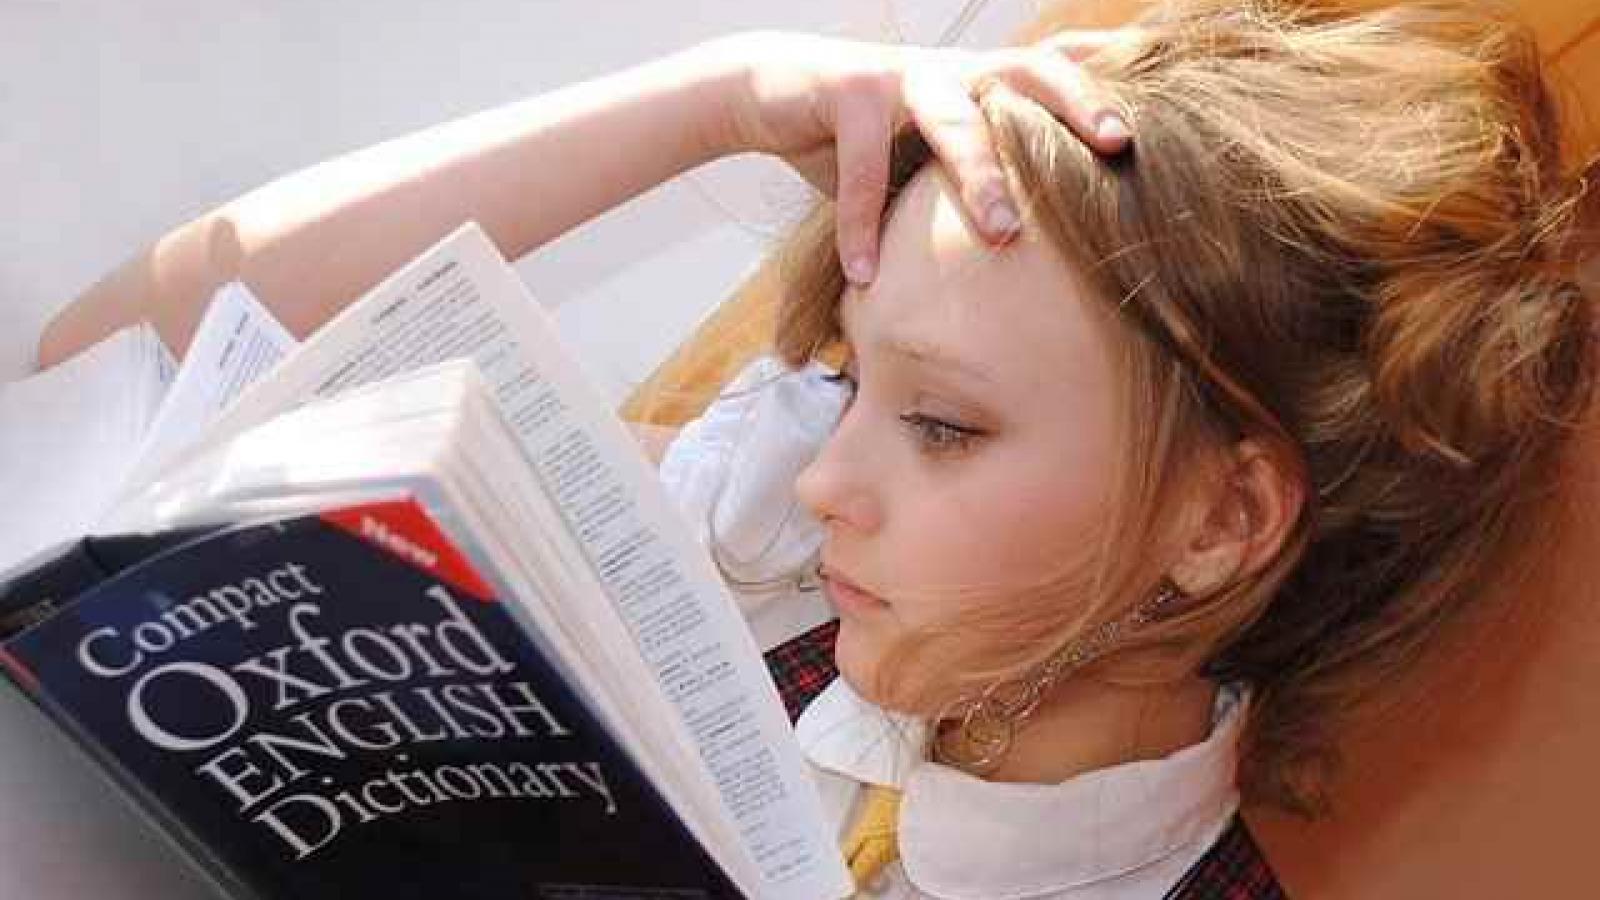 A girl reading an English dictionary